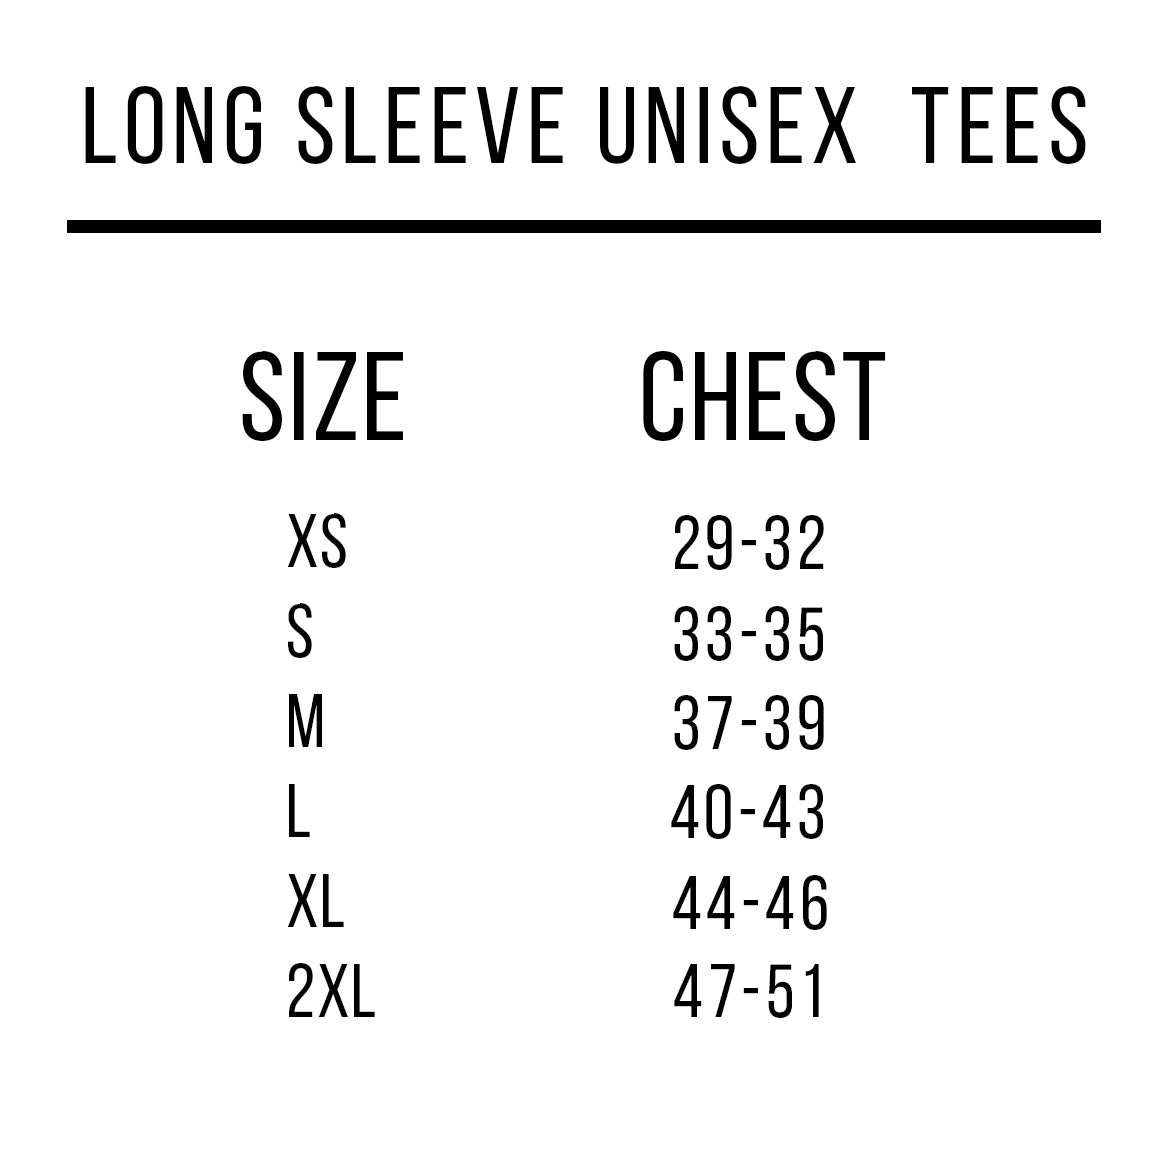 Makes You Happy Smiley Face | Long Sleeve Crew Neck